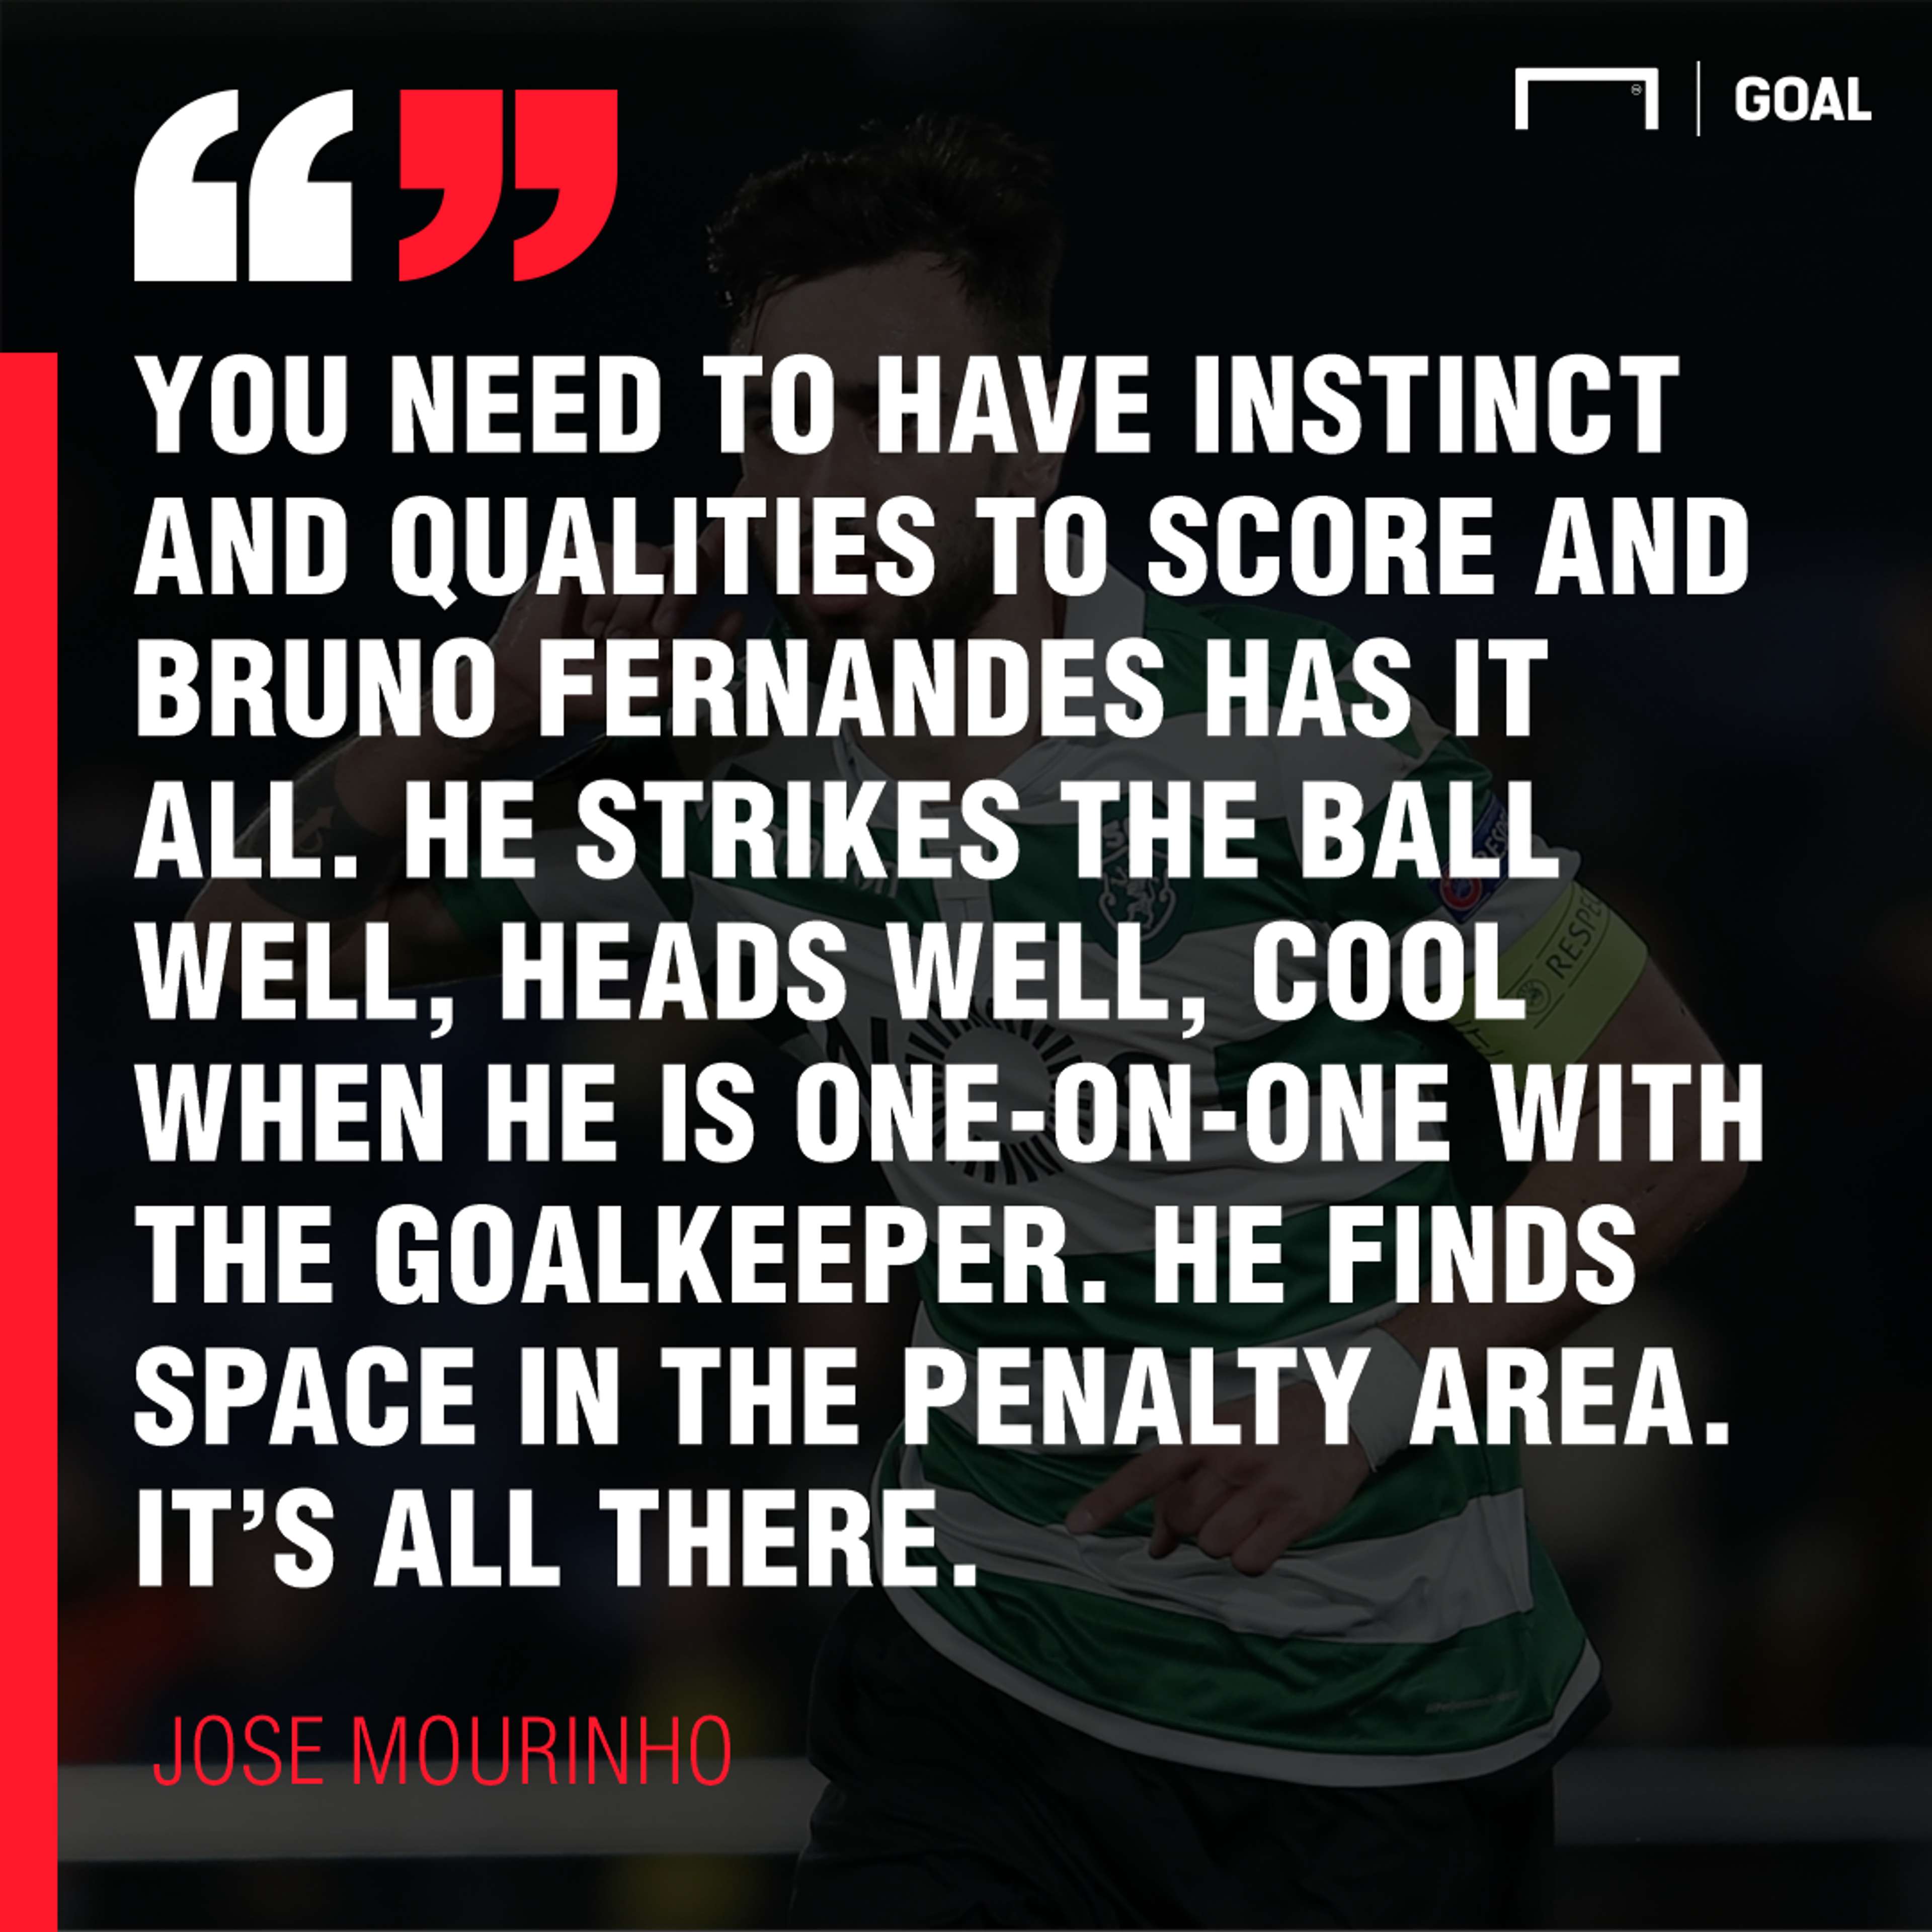 Mourinho Fernandes quote PS